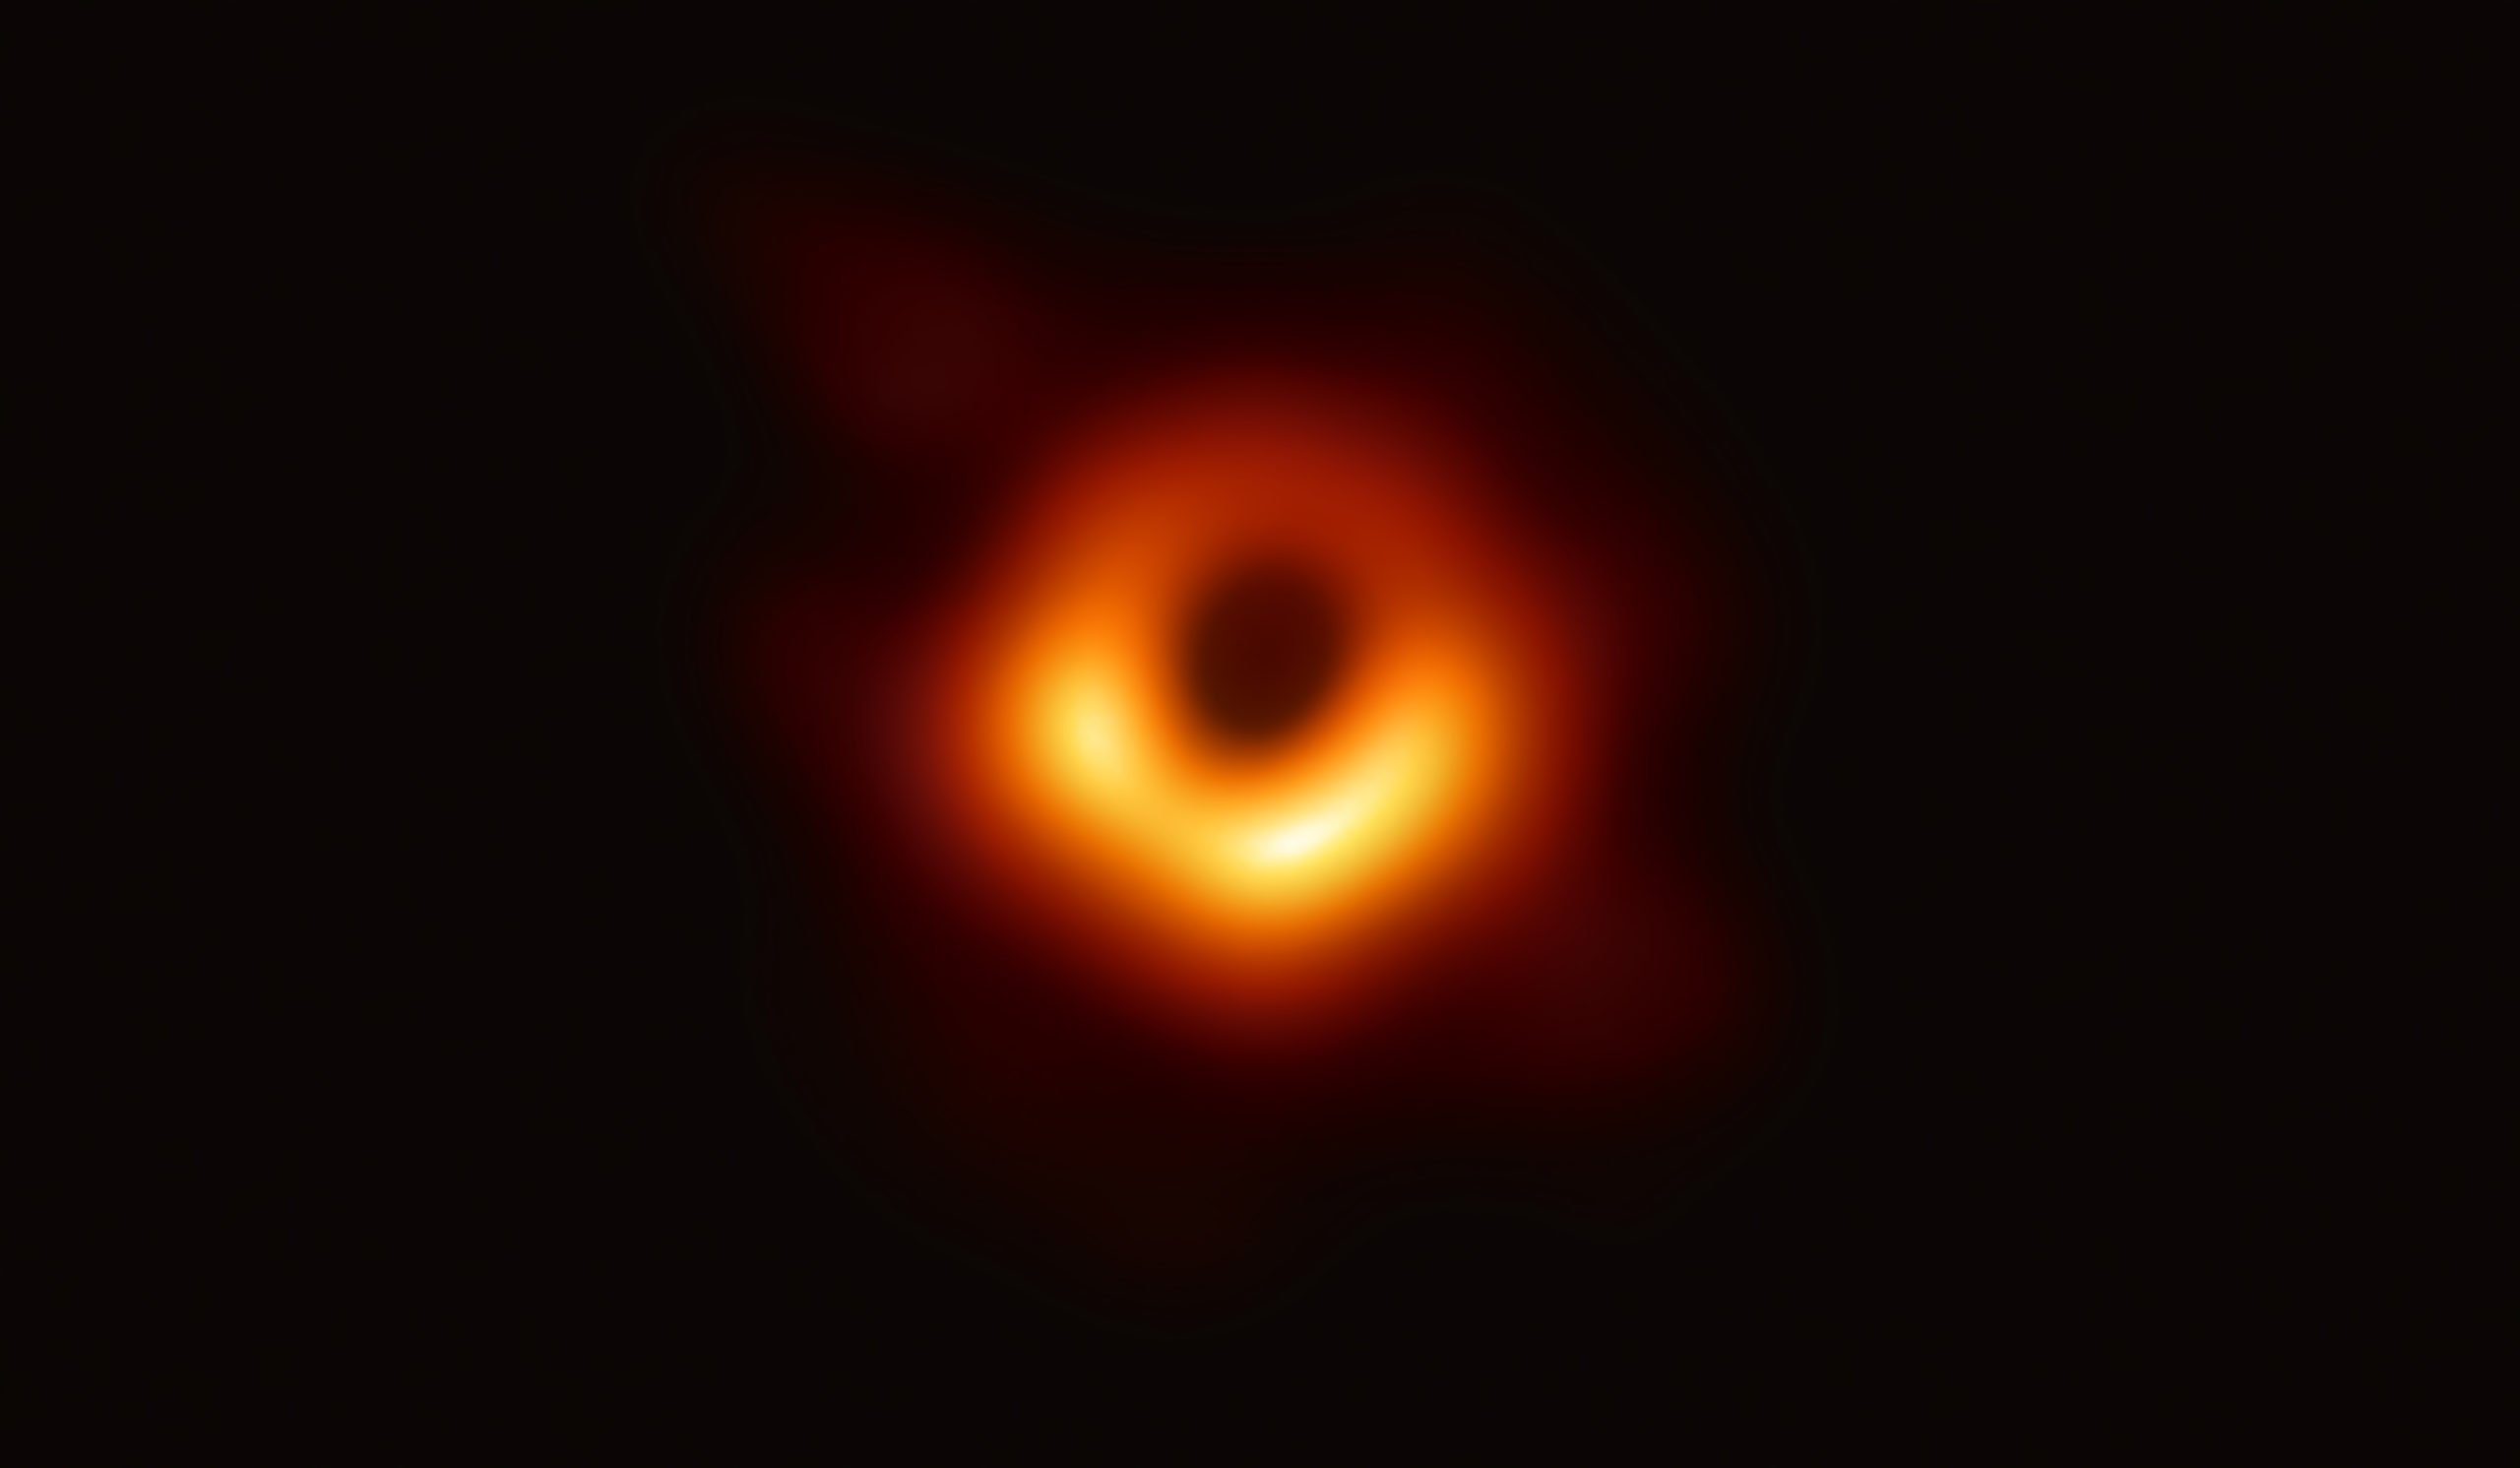 Astronomers are trying to determine how supermassive black holes, such as the one at the heart of the galaxy M87, grew so quickly. Image credit - EHT Collaboration